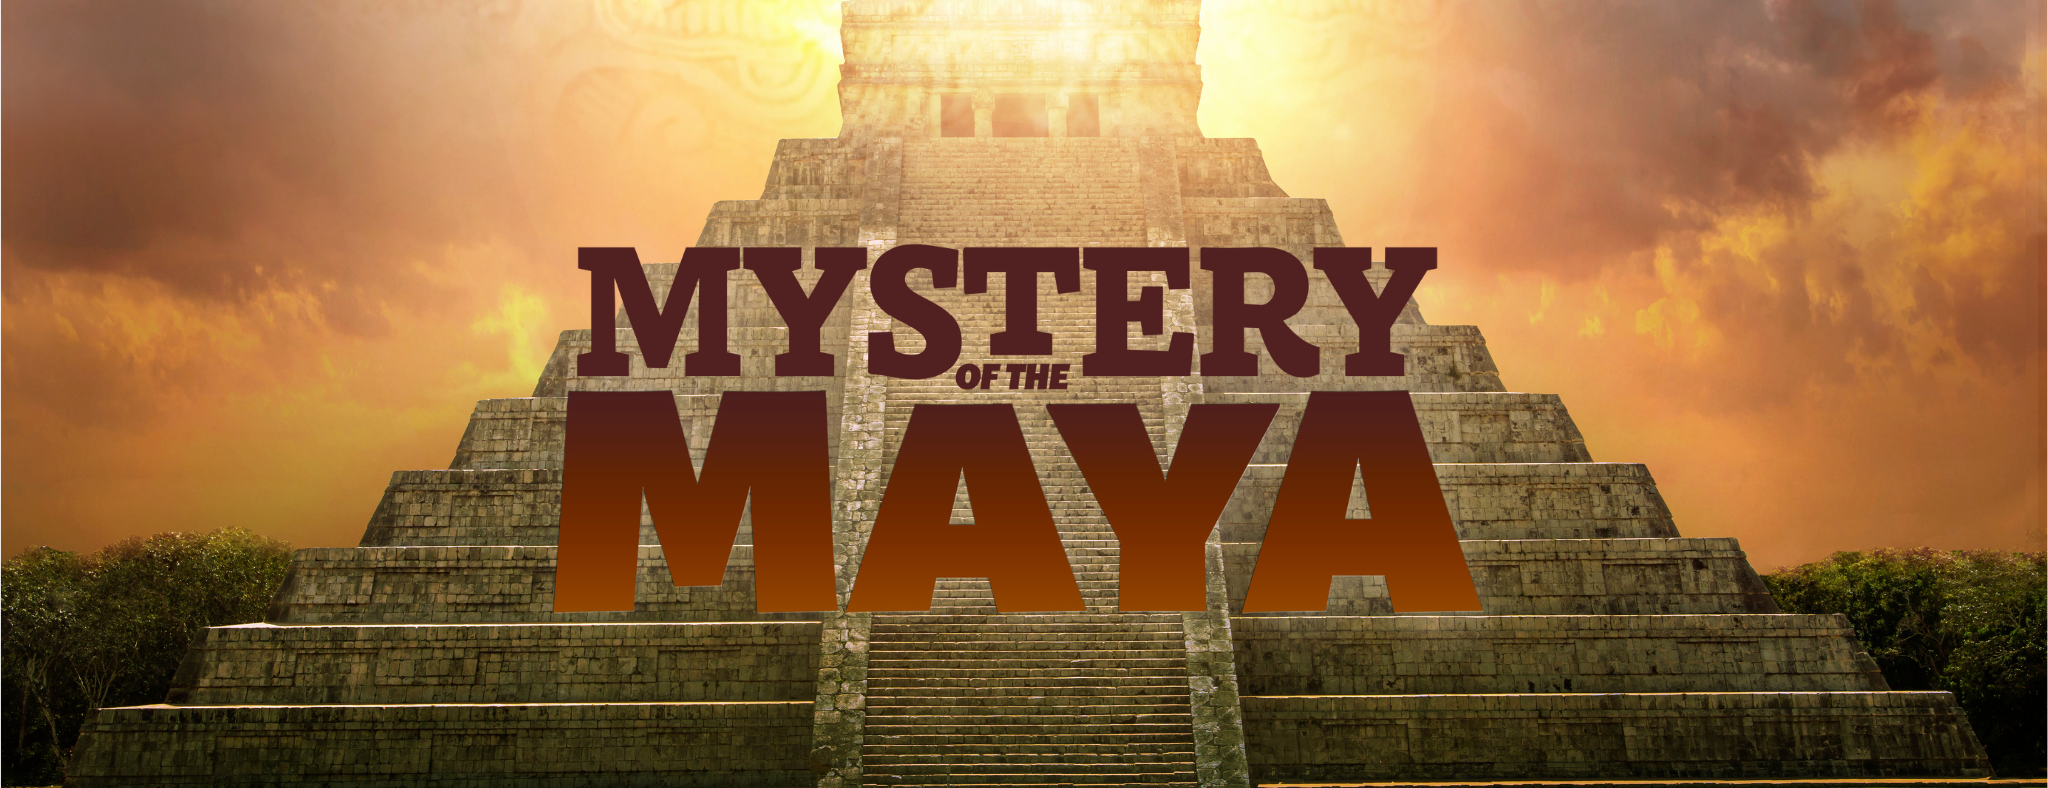 Pyramid background with sun radiating at the top. Mystery of the Maya title overlay.